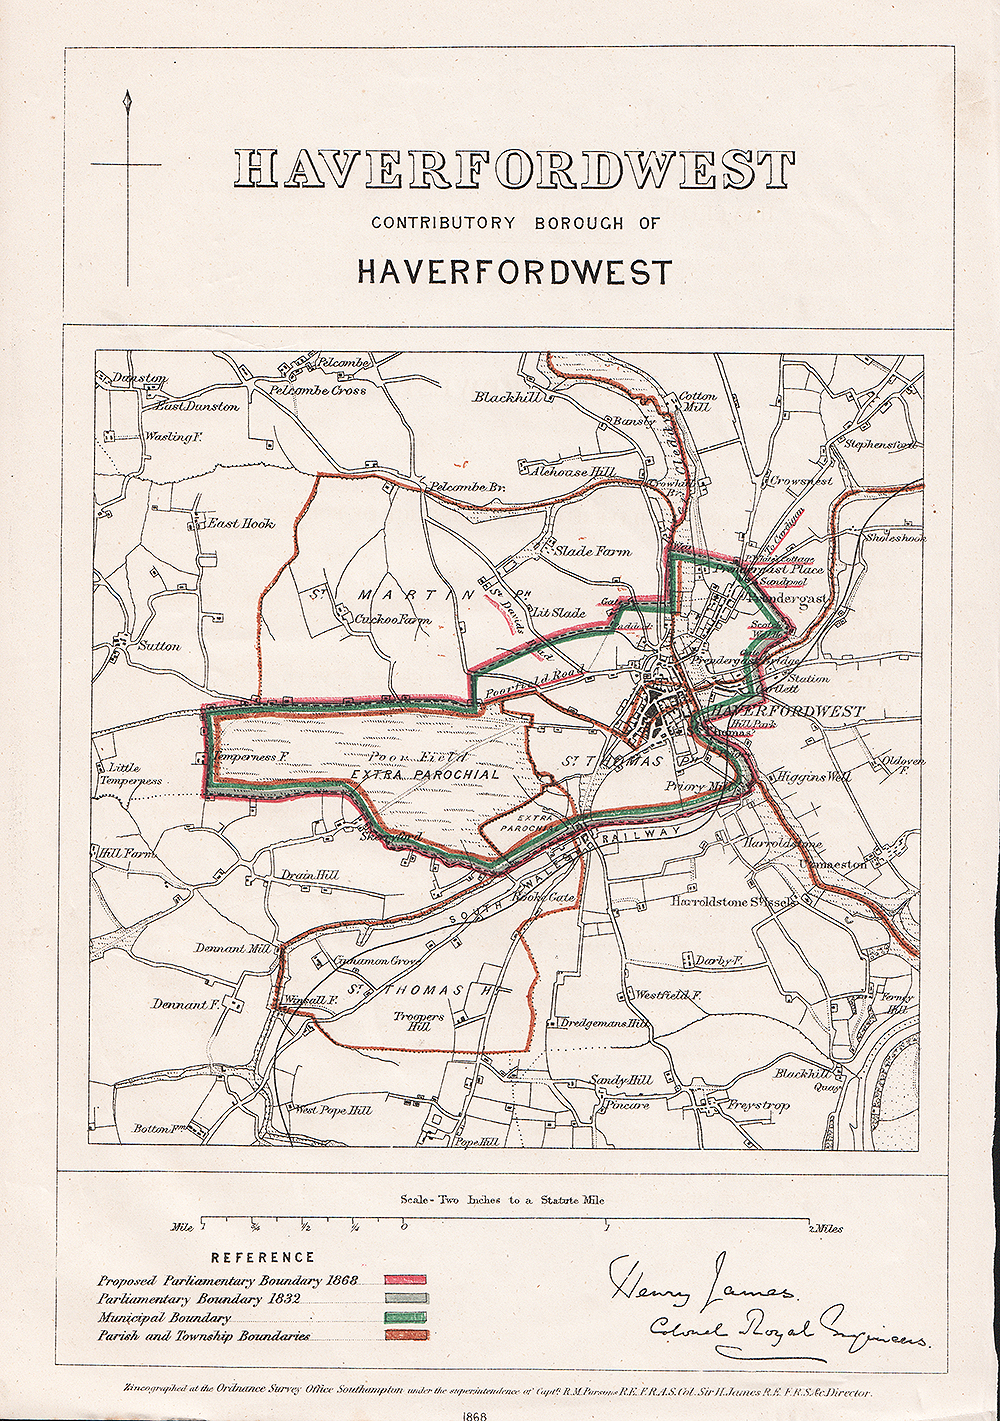 Contributory Borough of Haverfordwest